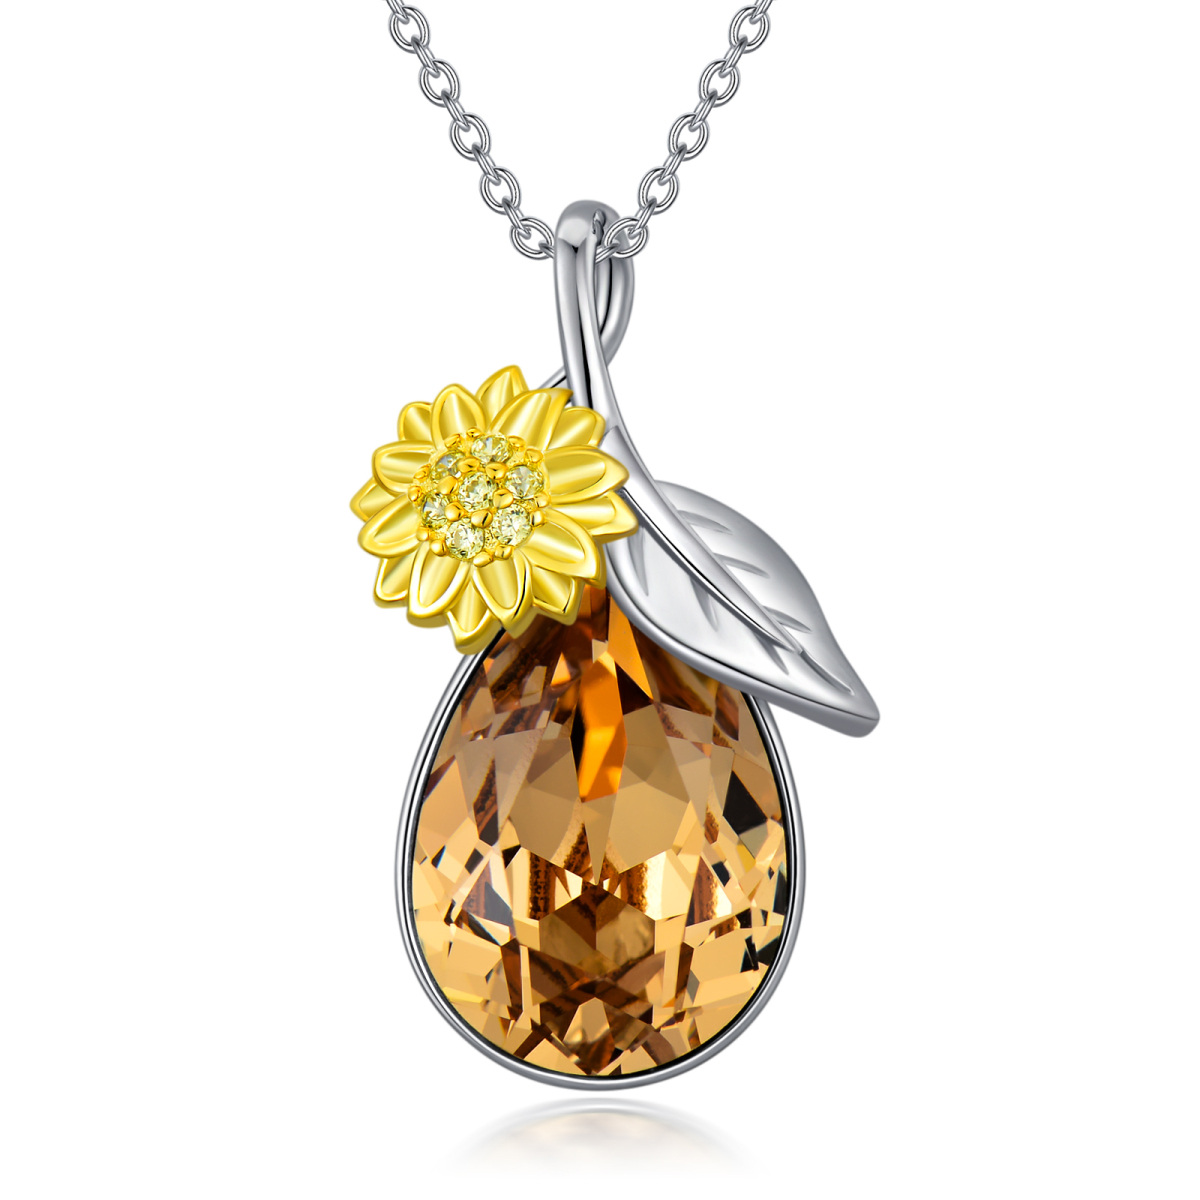 Sterling Silver Pear Shaped Crystal Sunflower Pendant Necklace-1